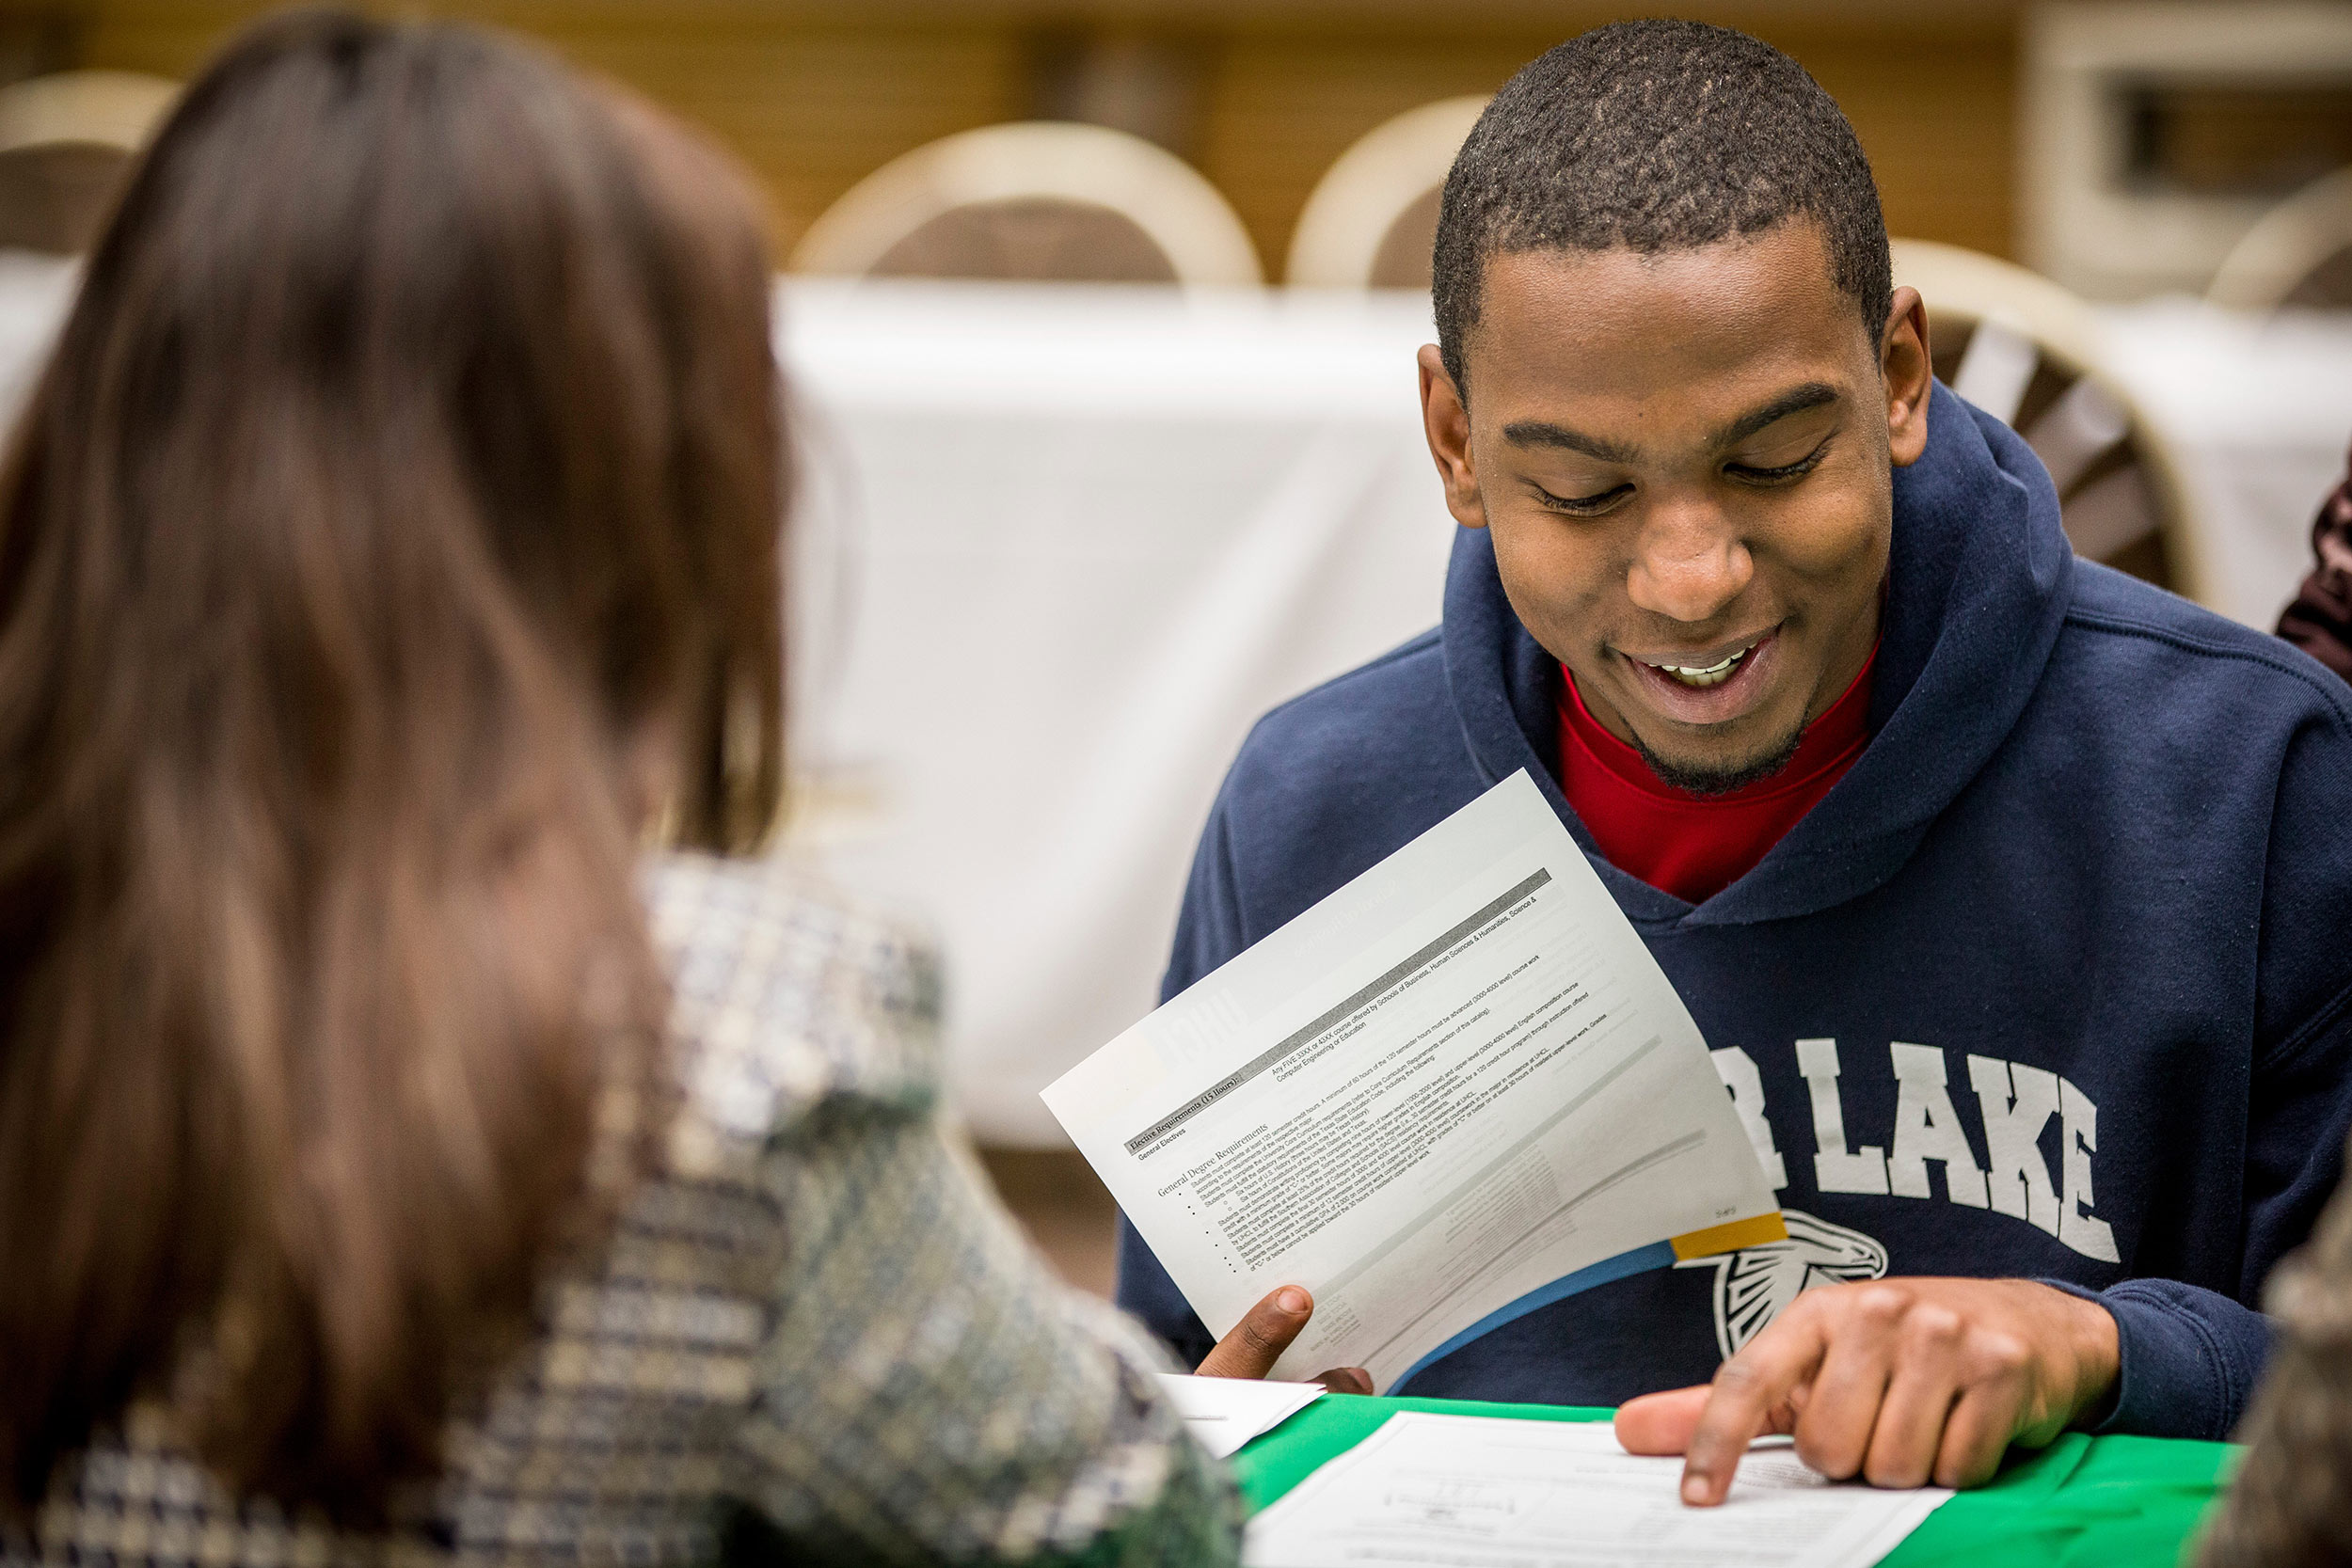 Student smiling and reading through papers